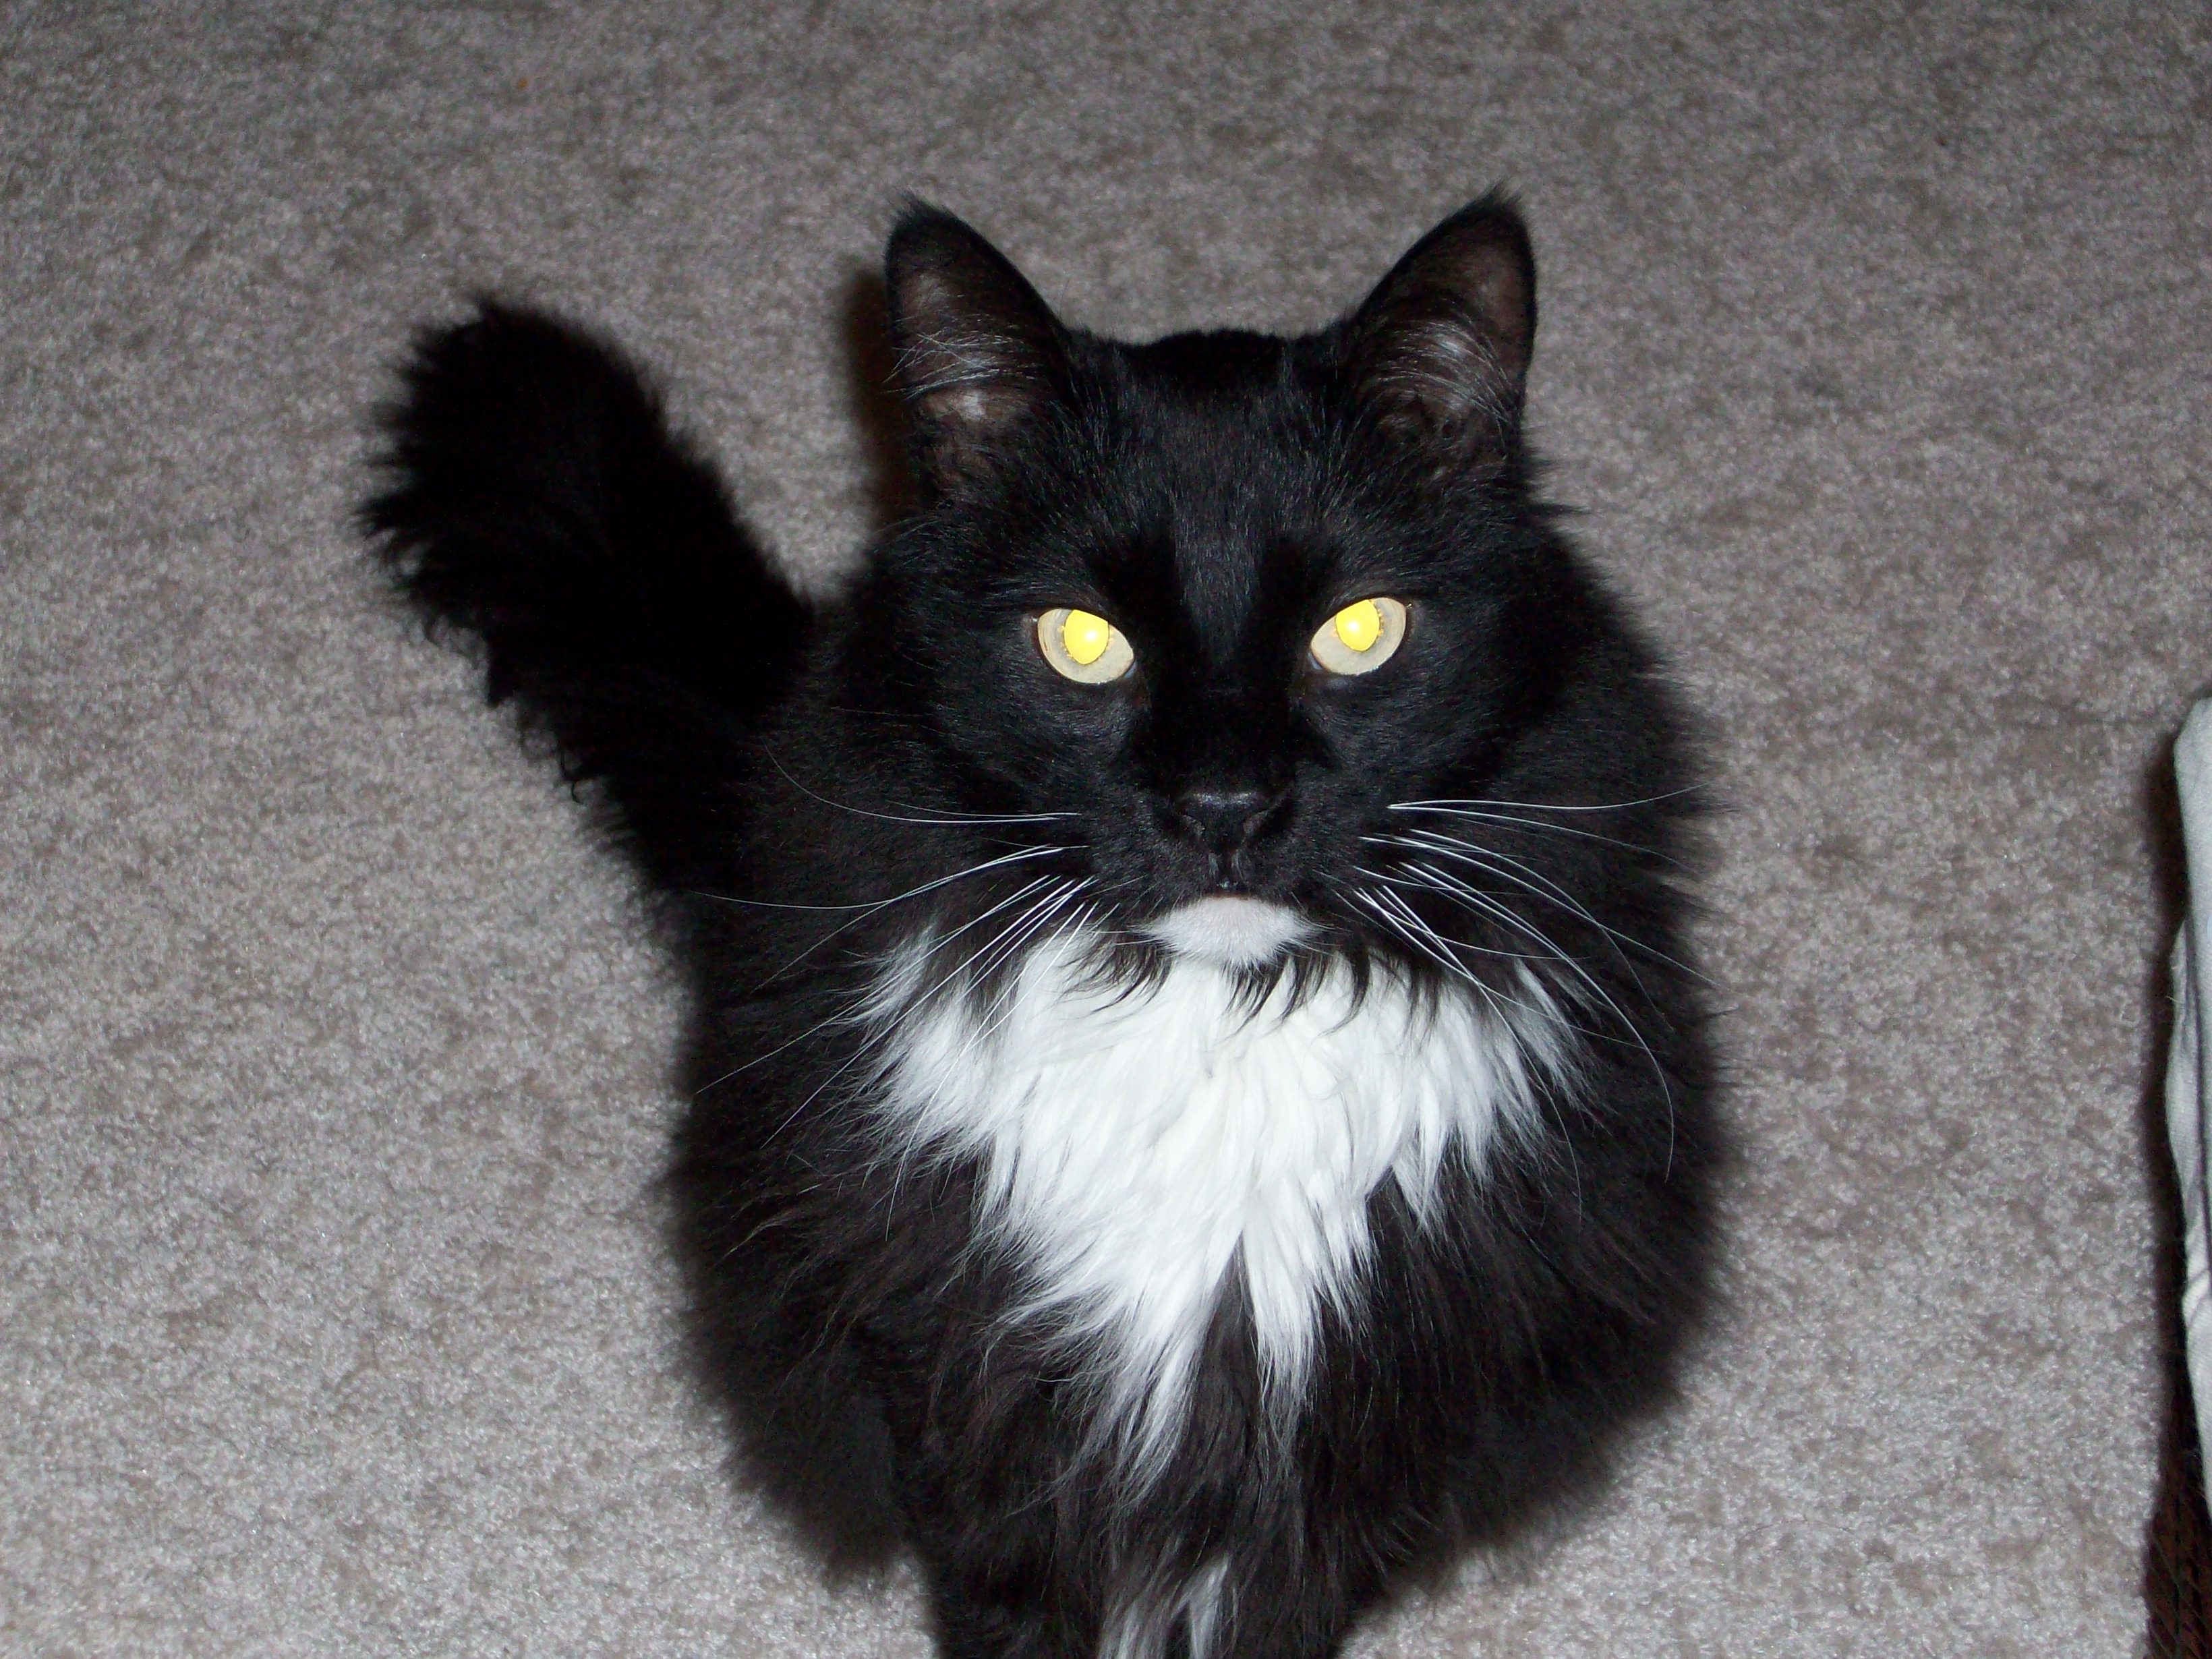 Long-haired black cat with a white chest ruffle looking at the camera